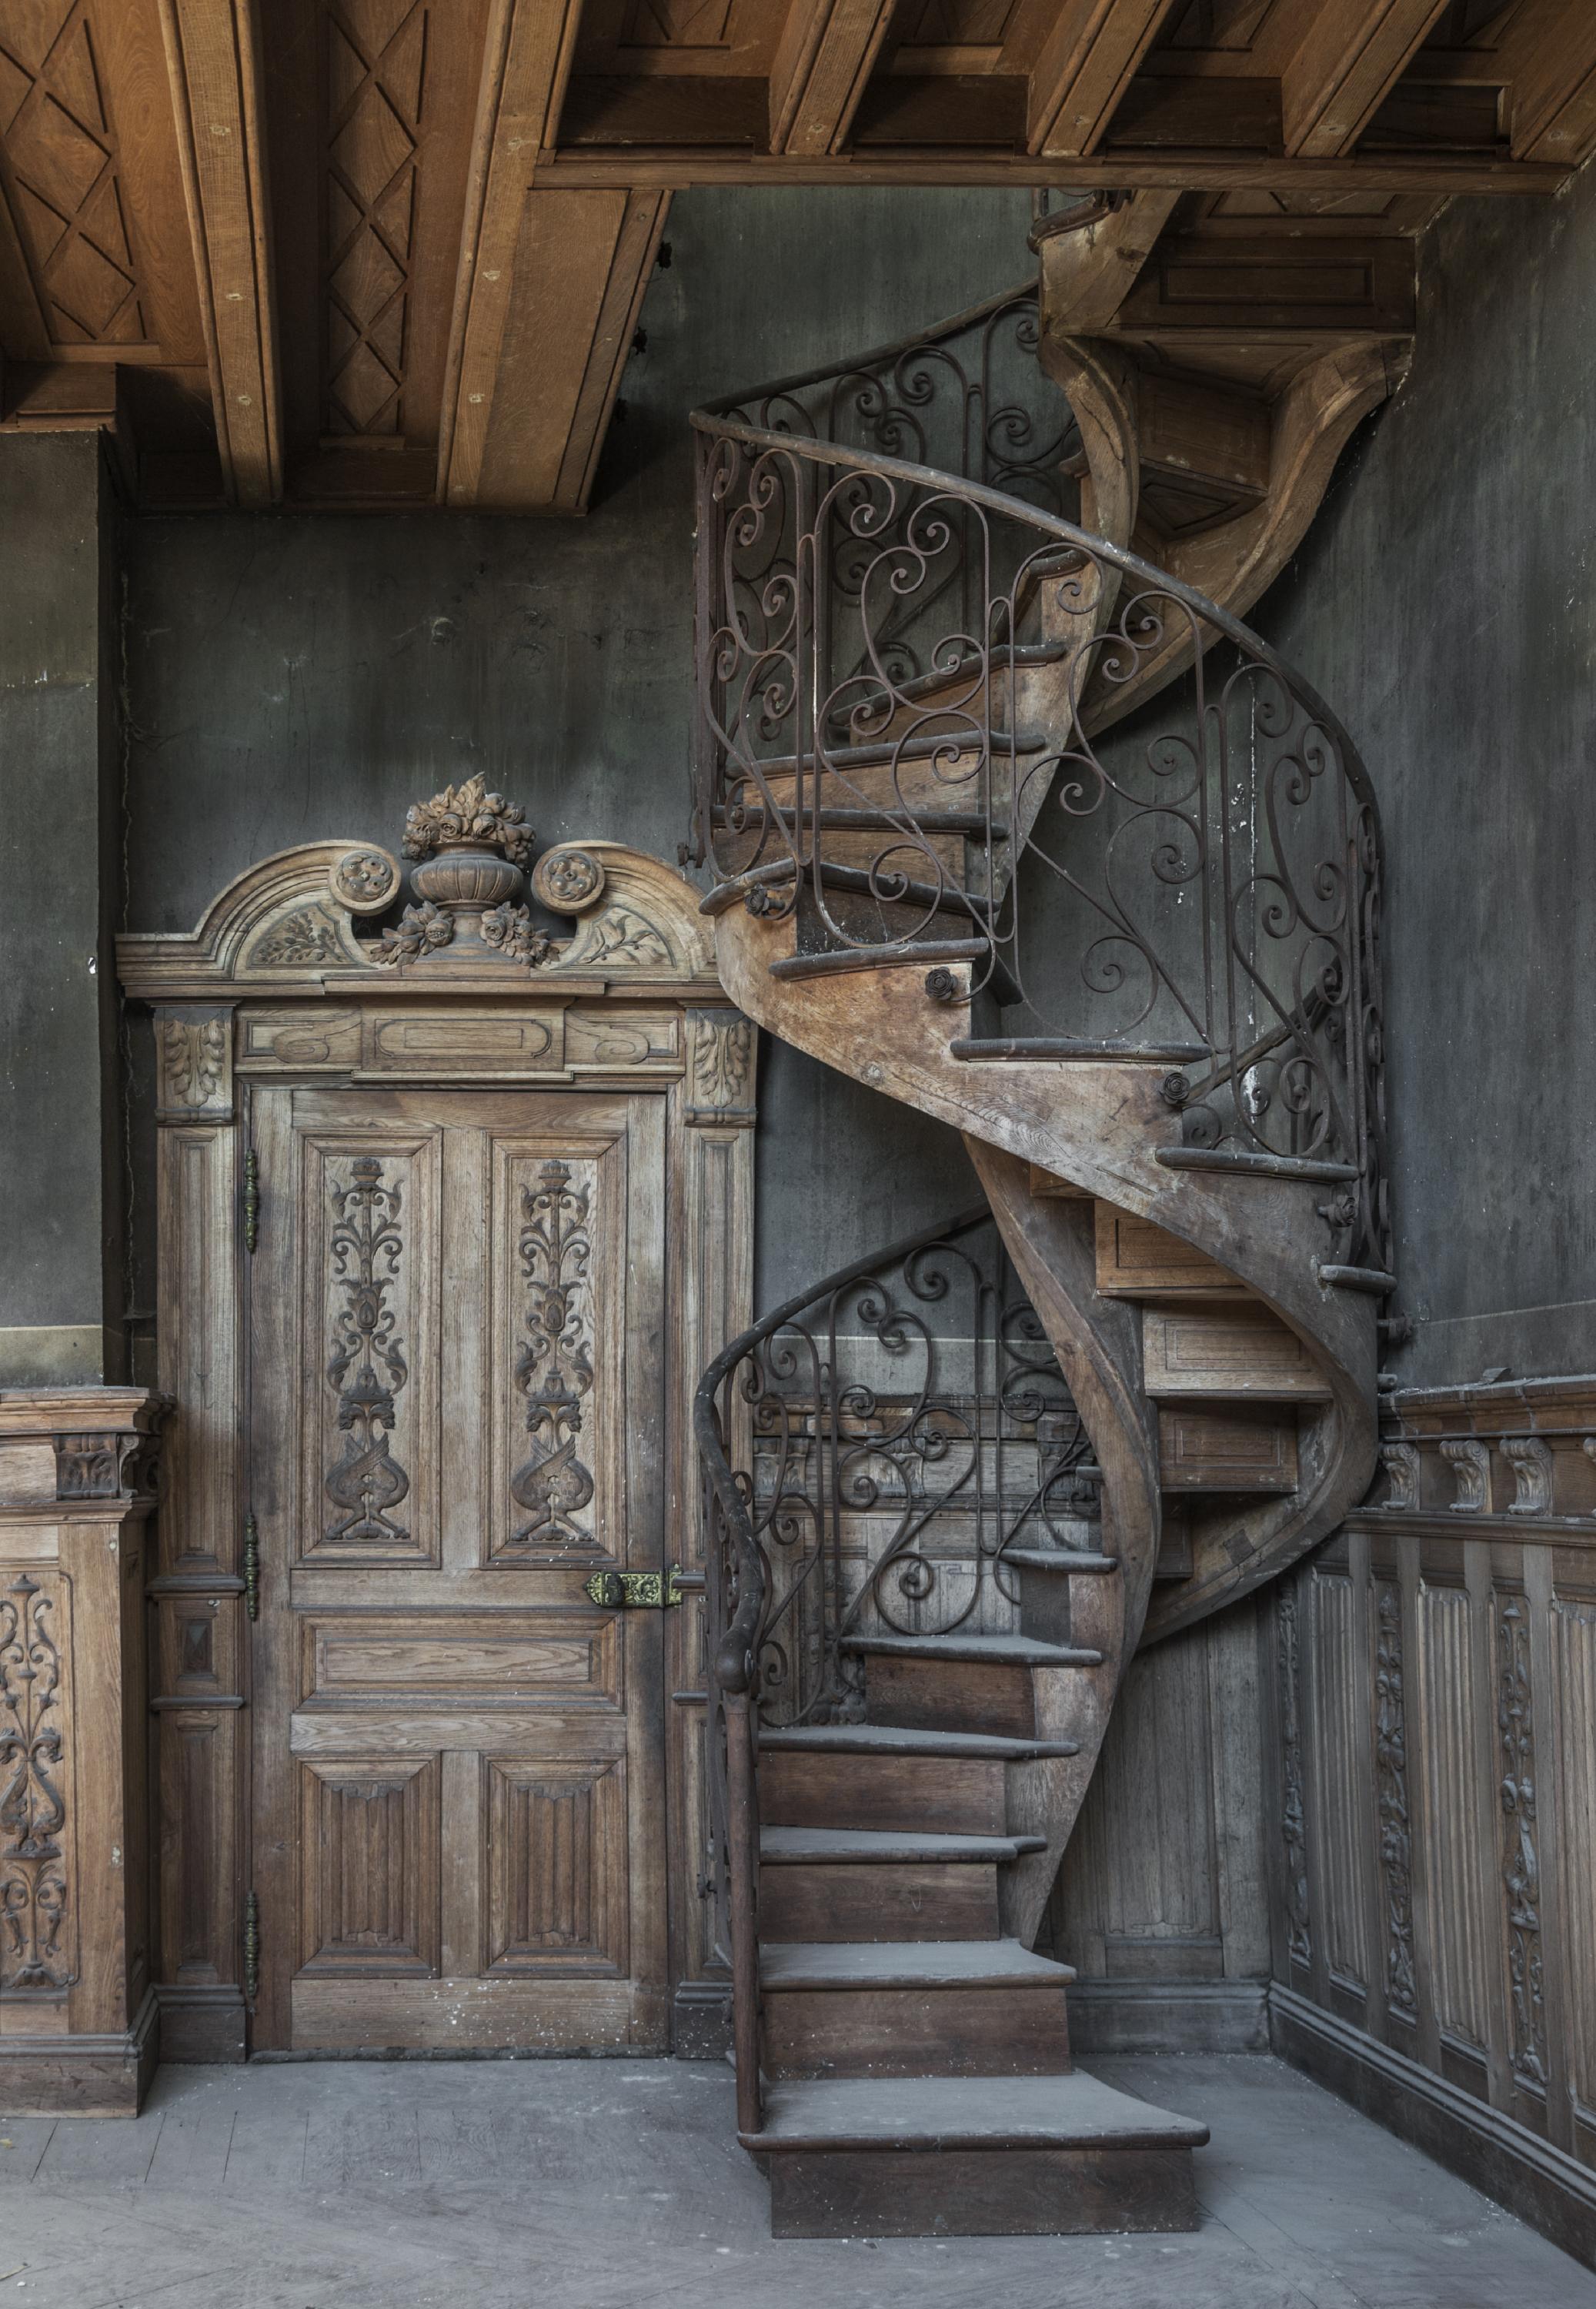 Beautiful antique spiral staircase made in the 19th century. Comes with its wrought iron railing decorated with flowers and windings.
This staircase is comes with the right guardrail that adorned the intermediate floor.